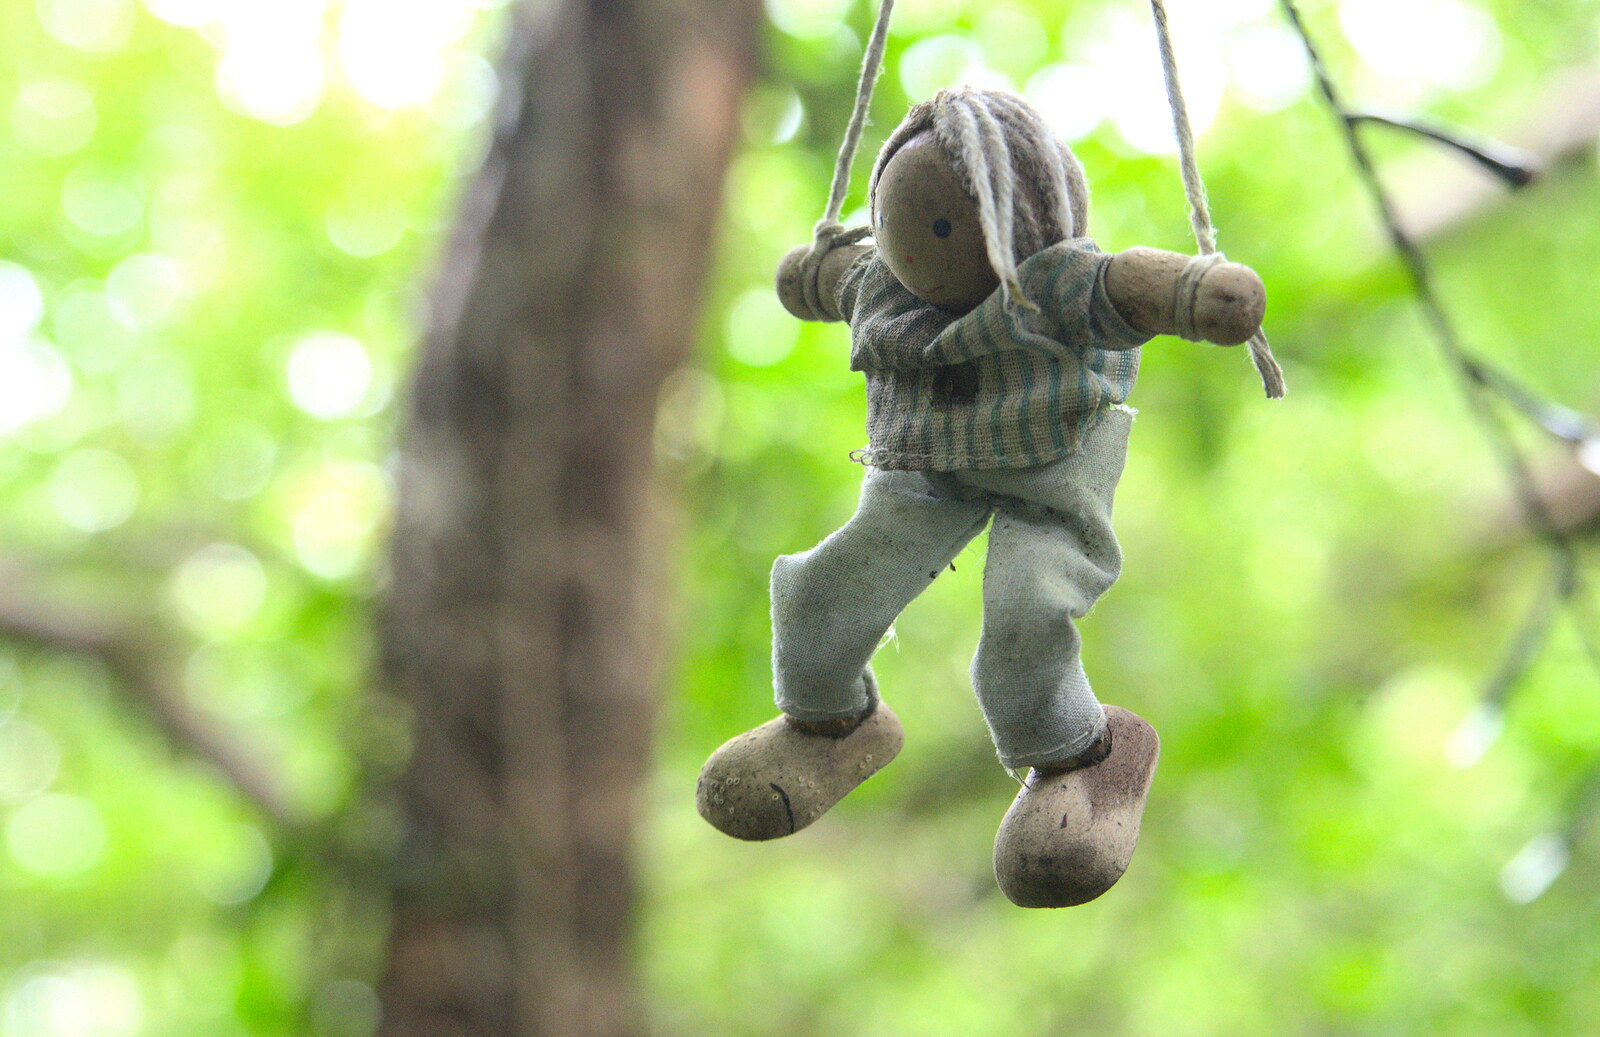 A toy hangs up in a 'fairy walk' near the hotel from In The Sneem, An tSnaidhm, Kerry, Ireland - 1st August 2017